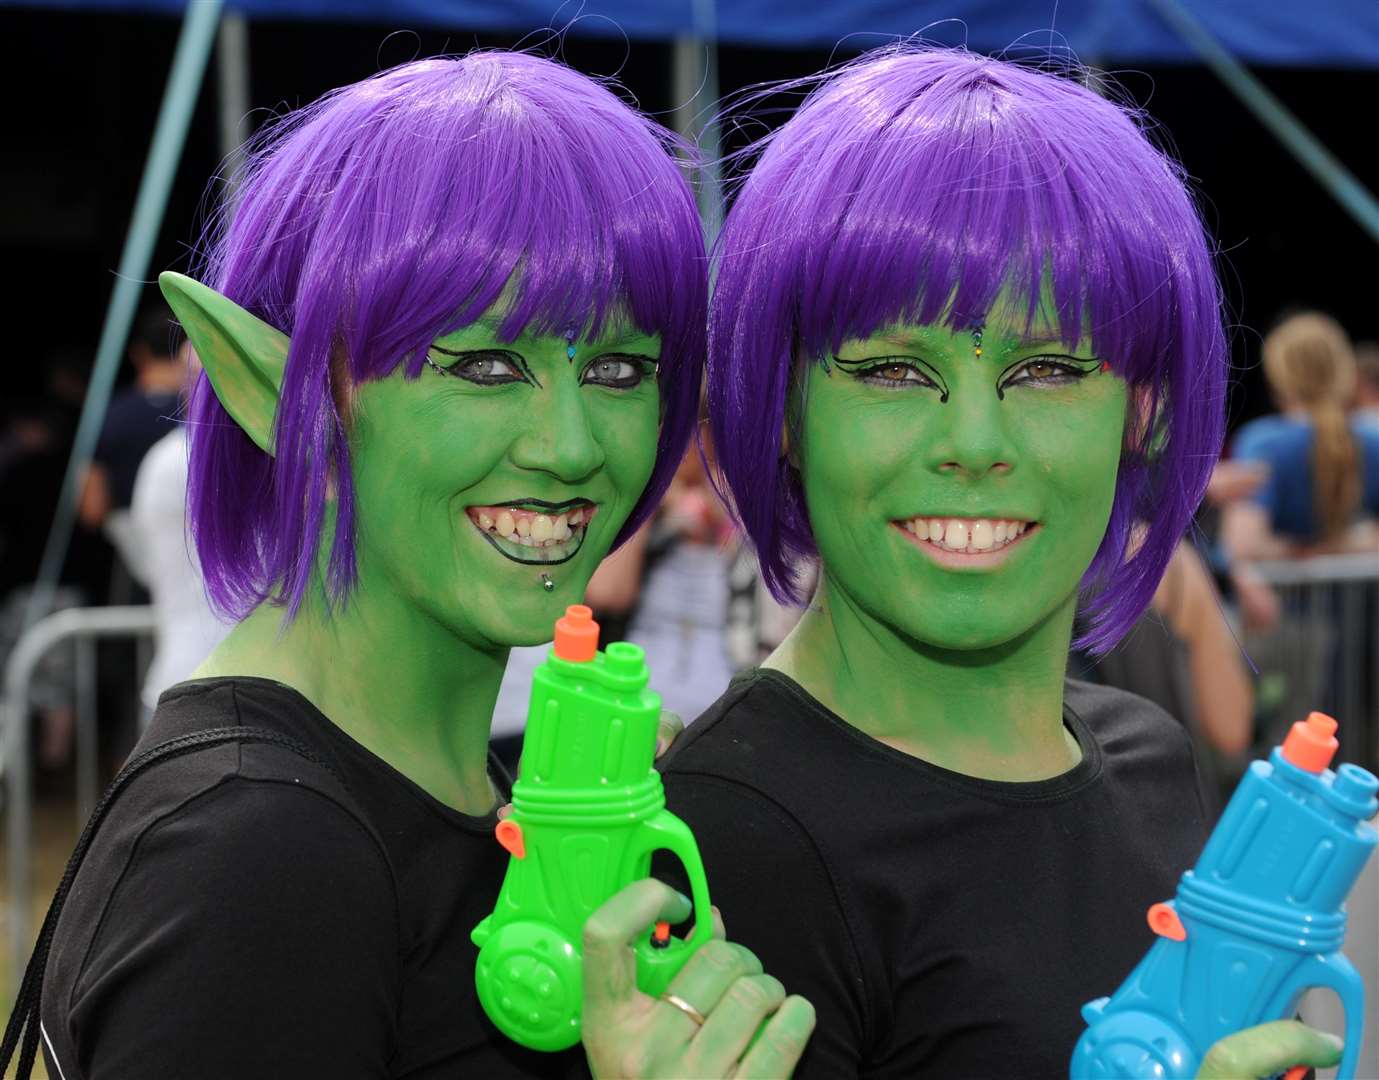 The fancy dress themes inspires creative festival-goers, here space, for Charlotte Benfield and Annabelle Silvey, rocking their green space elf look.